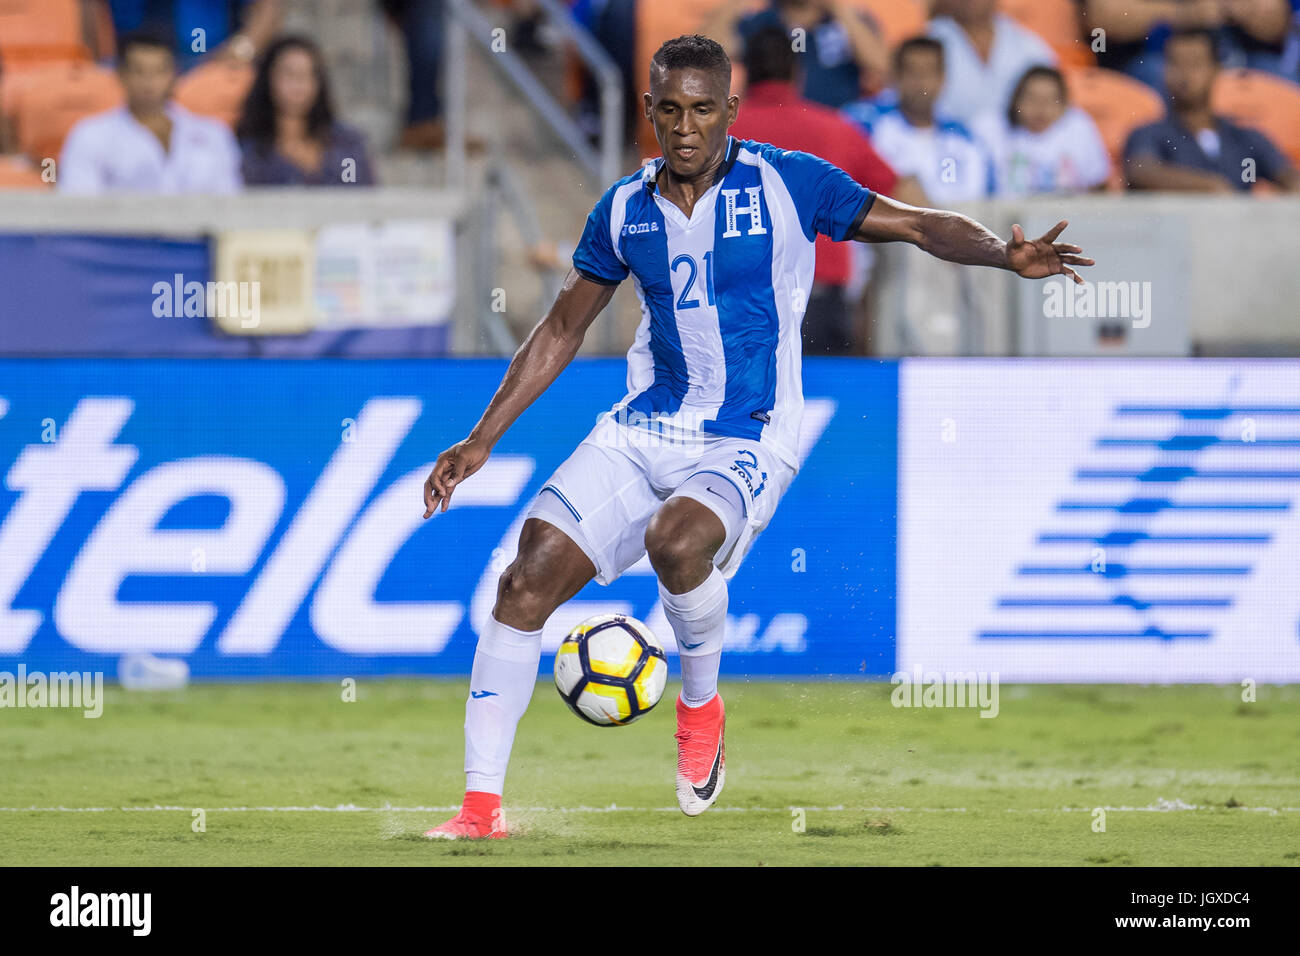 Houston, Texas, USA. 11th July, 2017. Honduras defender Brayan Beckeles (21) controls the ball during the 2nd half of an international CONCACAF Gold Cup soccer match between Honduras and French Guiana at BBVA Compass Stadium in Houston, TX on July 11th, 2017. The game ended in a 0-0 draw. Credit: Trask Smith/ZUMA Wire/Alamy Live News Stock Photo